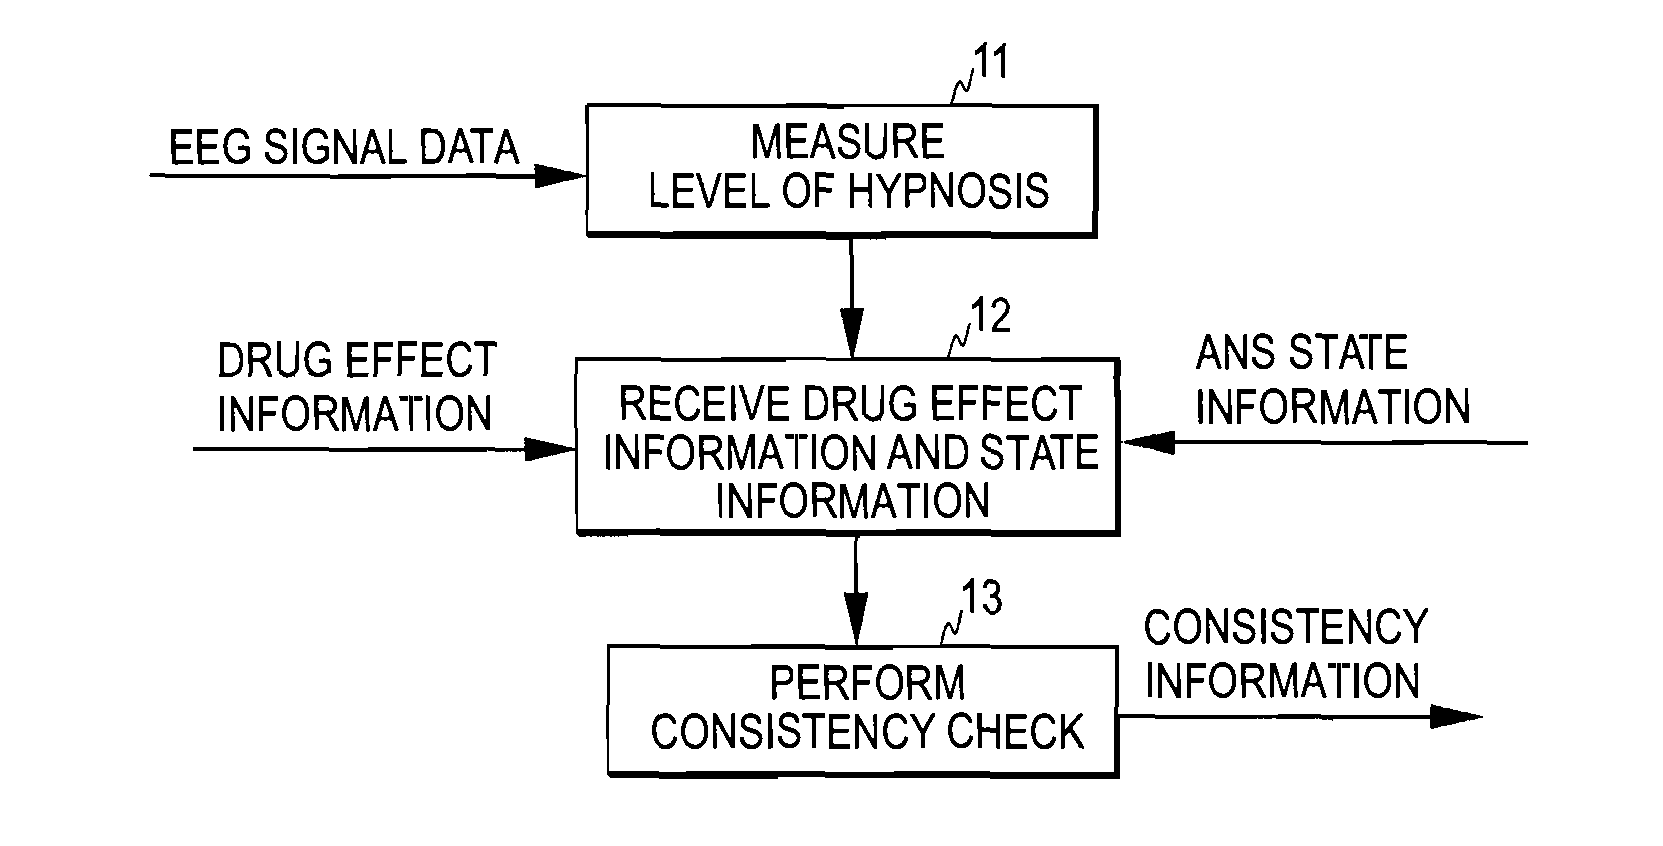 Detection of anomalies in measurement of level of hypnosis